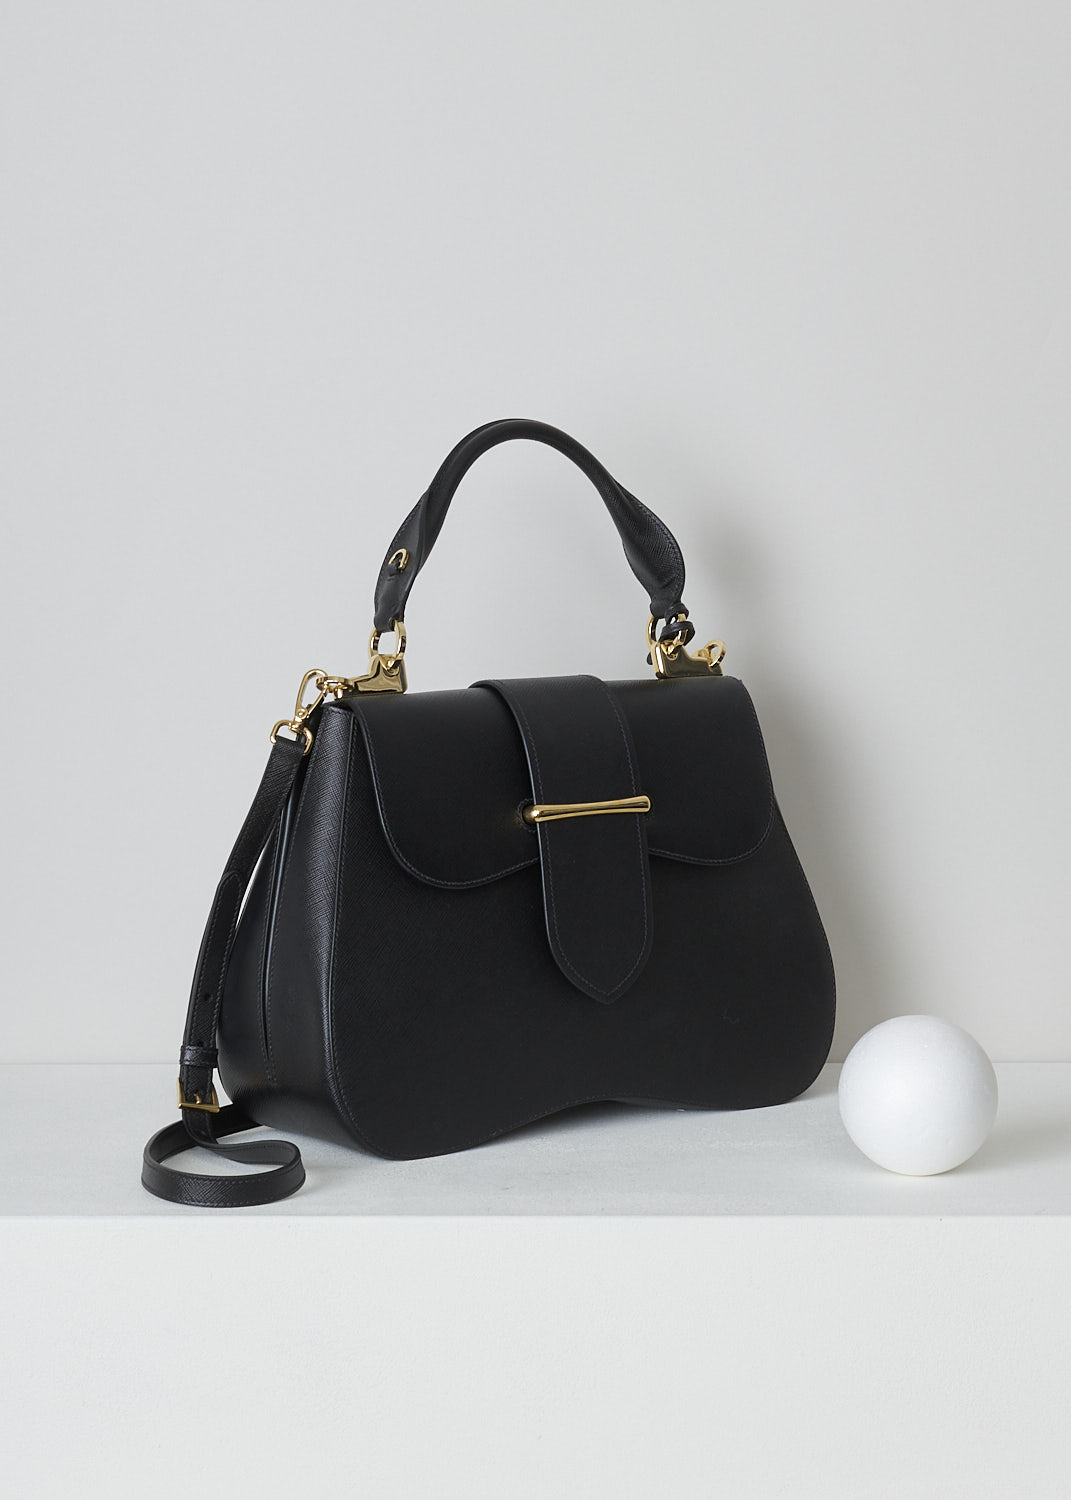 PRADA, LARGE SIDONIE TOP HANDLE BAG IN BLACK, CARTELLA_1BN002_F0002_NERO, Black, Side, This large black Sidonie Top Handle Bag is made with Saffiano leather. The bag comes with a leather handle and an adjustable and detachable shoulder strap. The bag has gold-tone metal hardware with the brand's logo on the back. The removable leather keychain has that same gold-tone logo on it. The slip-through closure opens up to reveal its red interior. The bag has a single, spacious compartment with a zipped inner pocket to one side and a patch pocket on the other side.  

